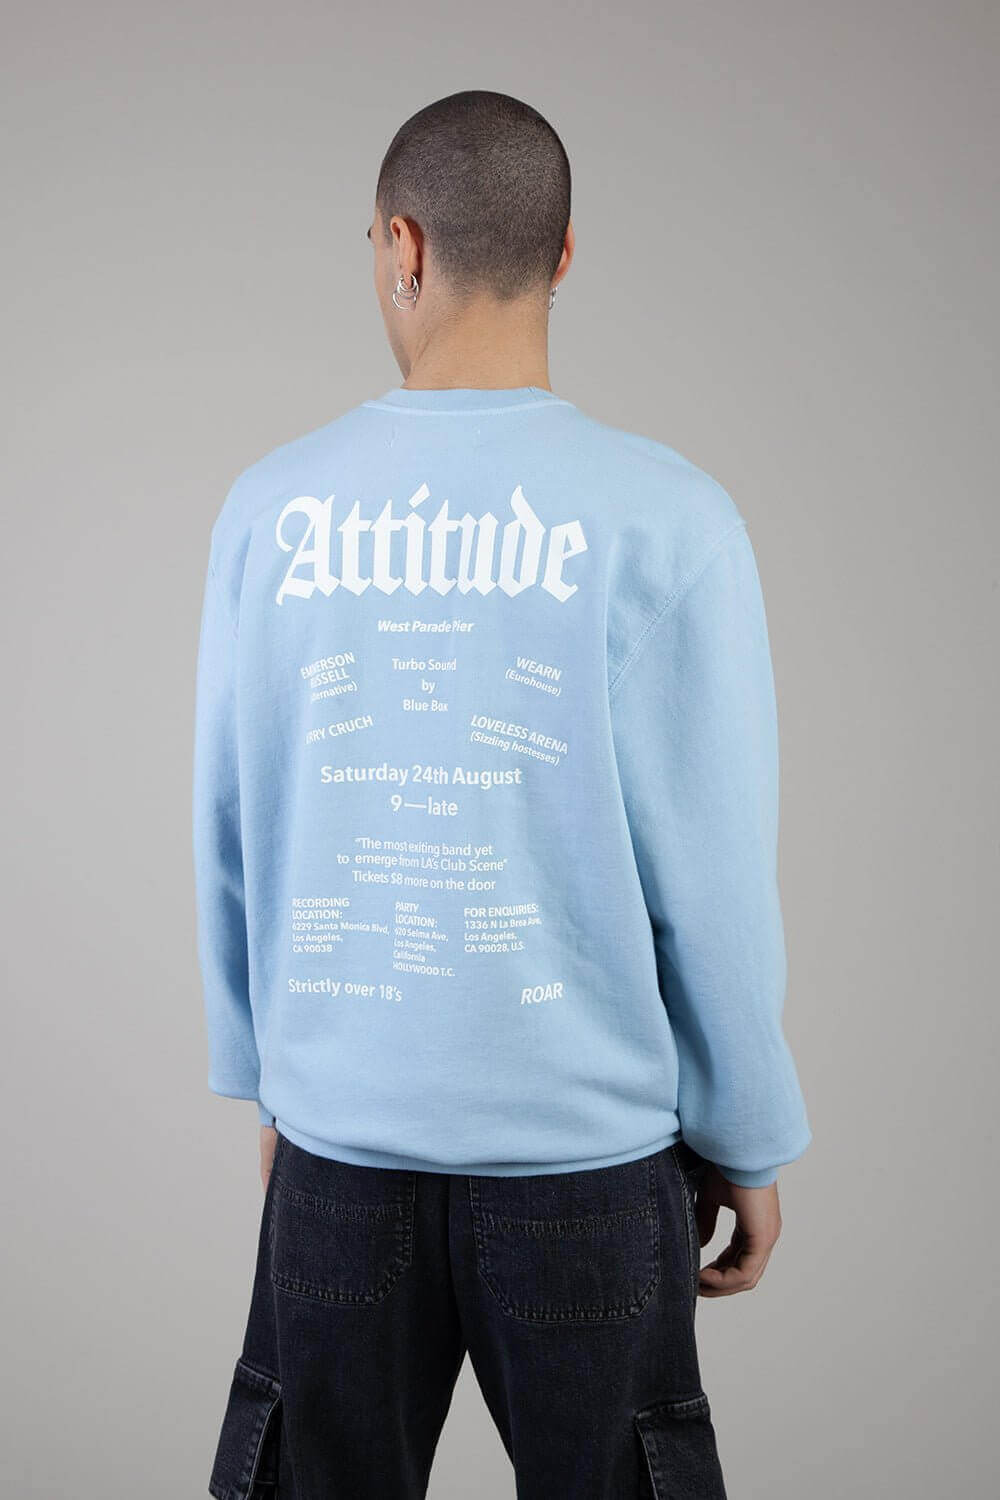 ATTITUDE CREWNECK Regular fit sweater with printed logo on the front. Composition: 100% Cotton HTC LOS ANGELES